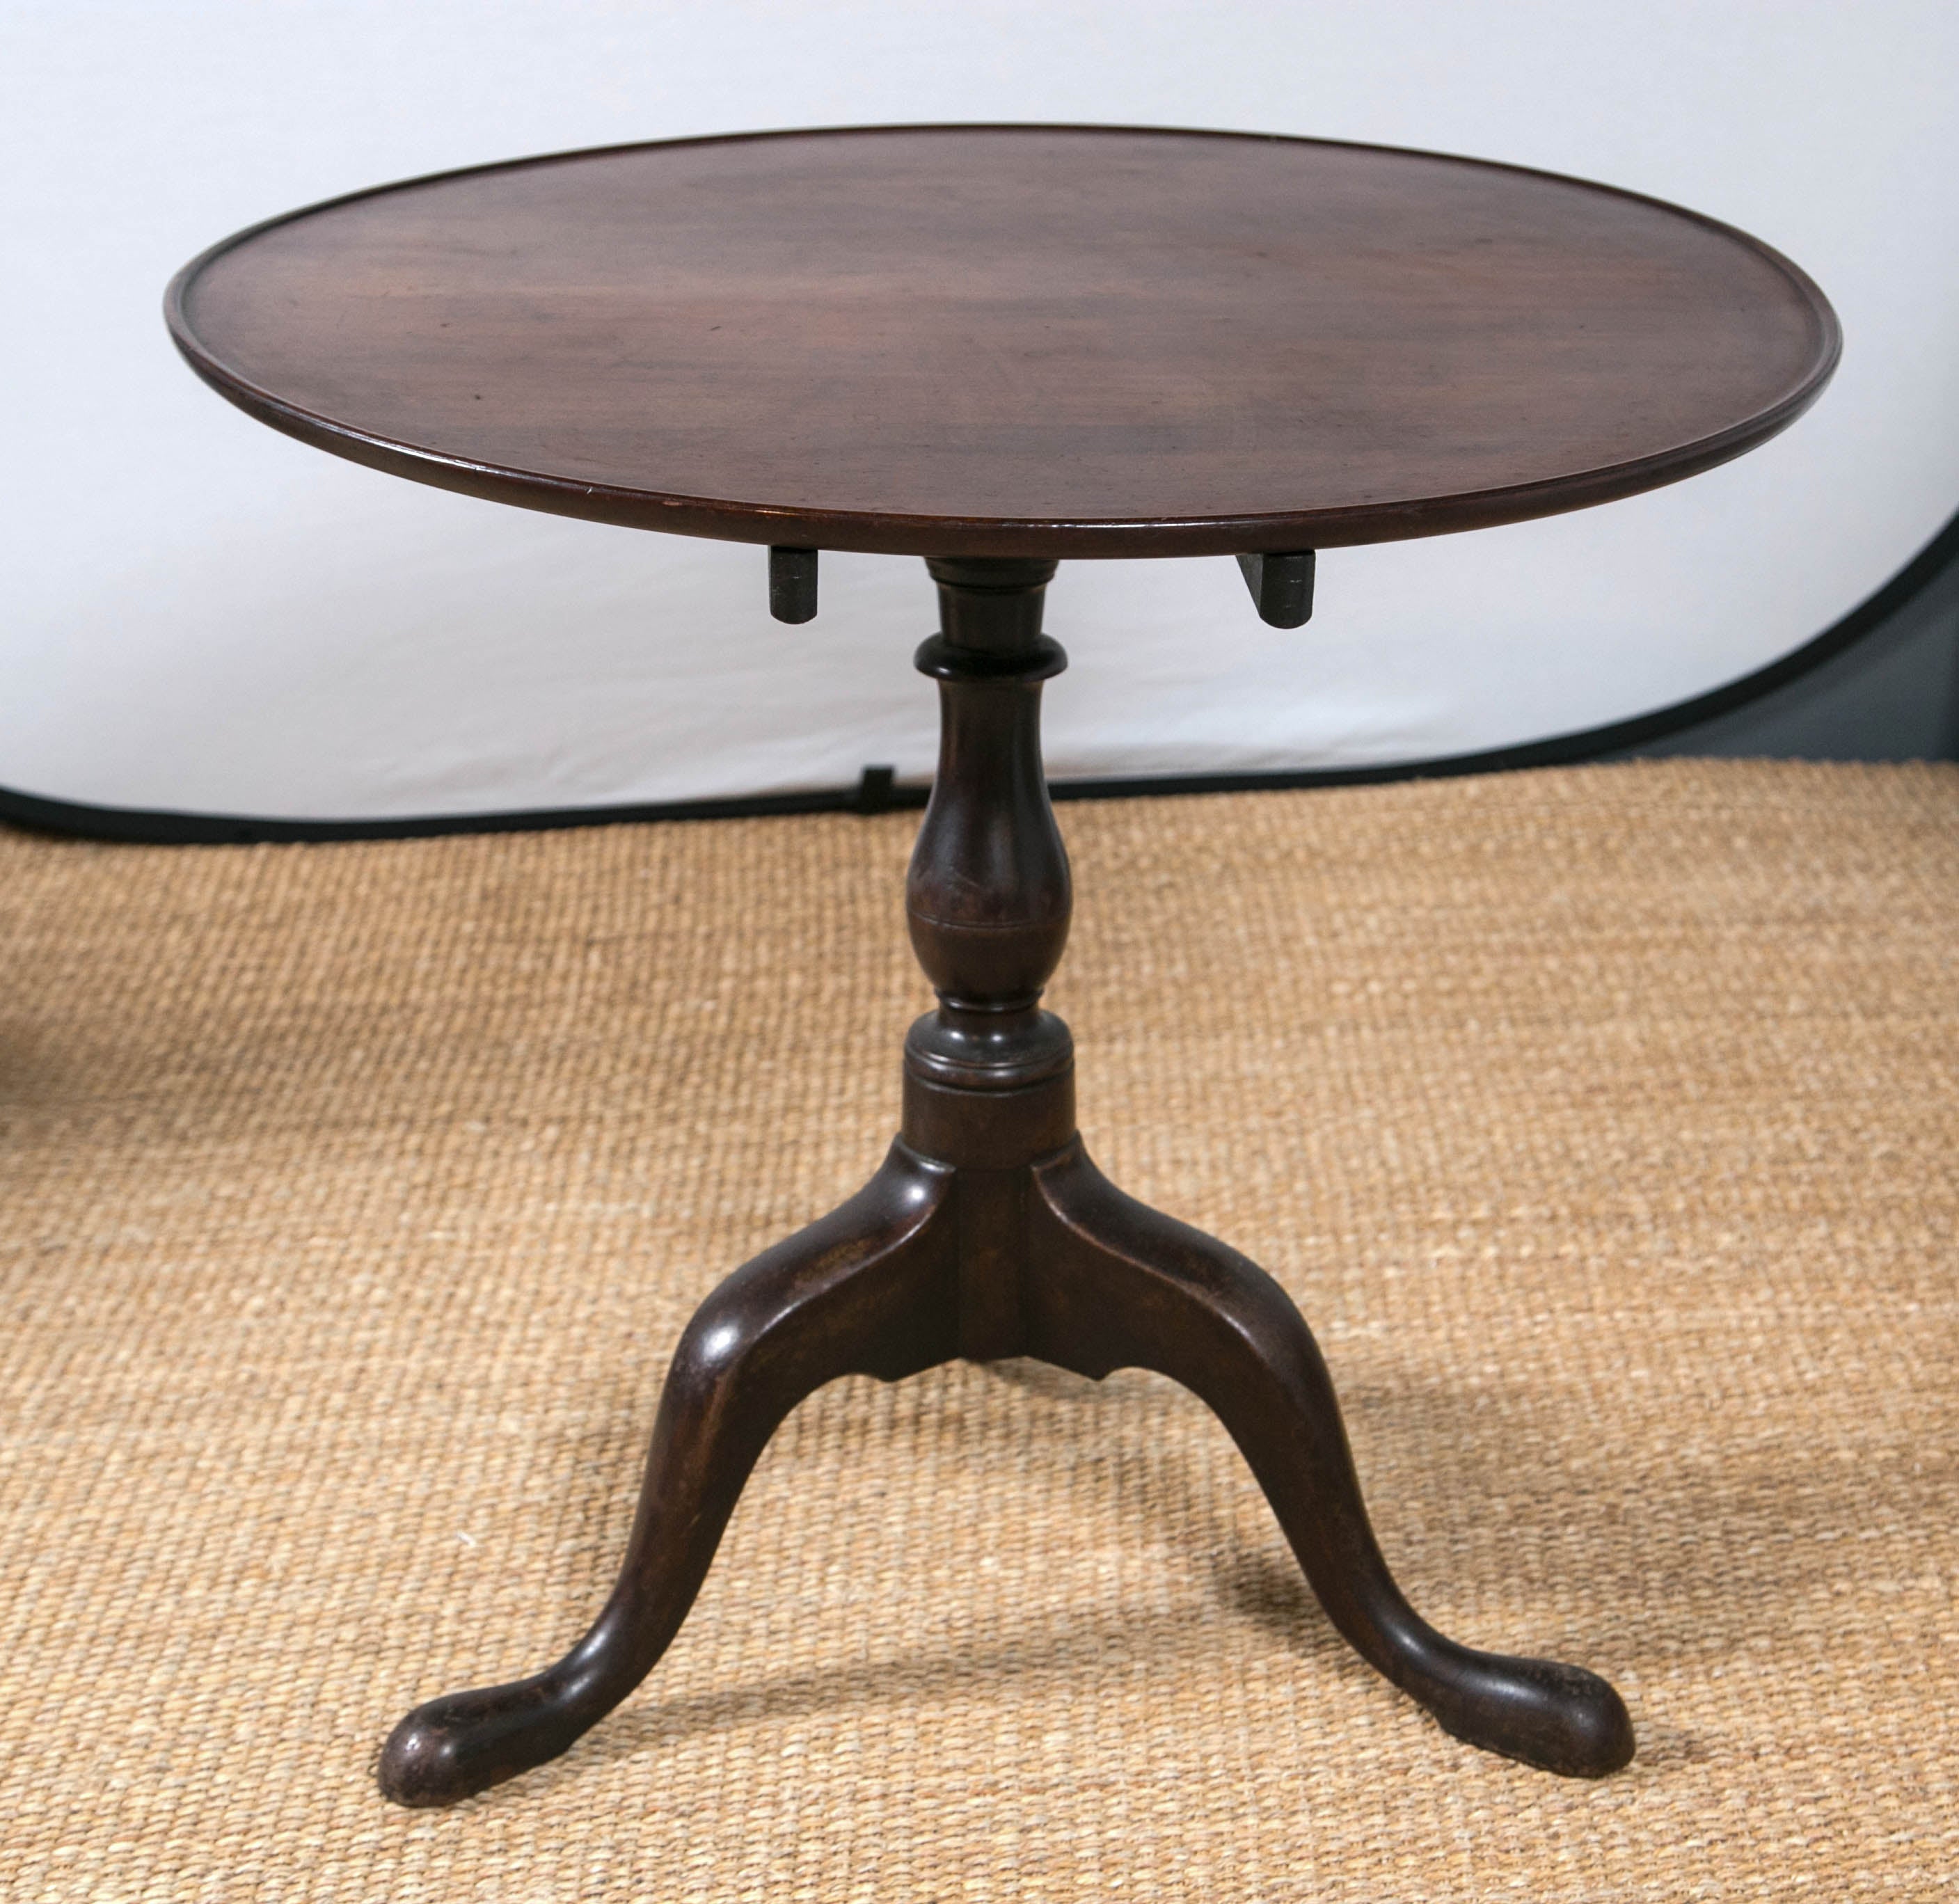 Period  mahogany tilt-top table with great patina.